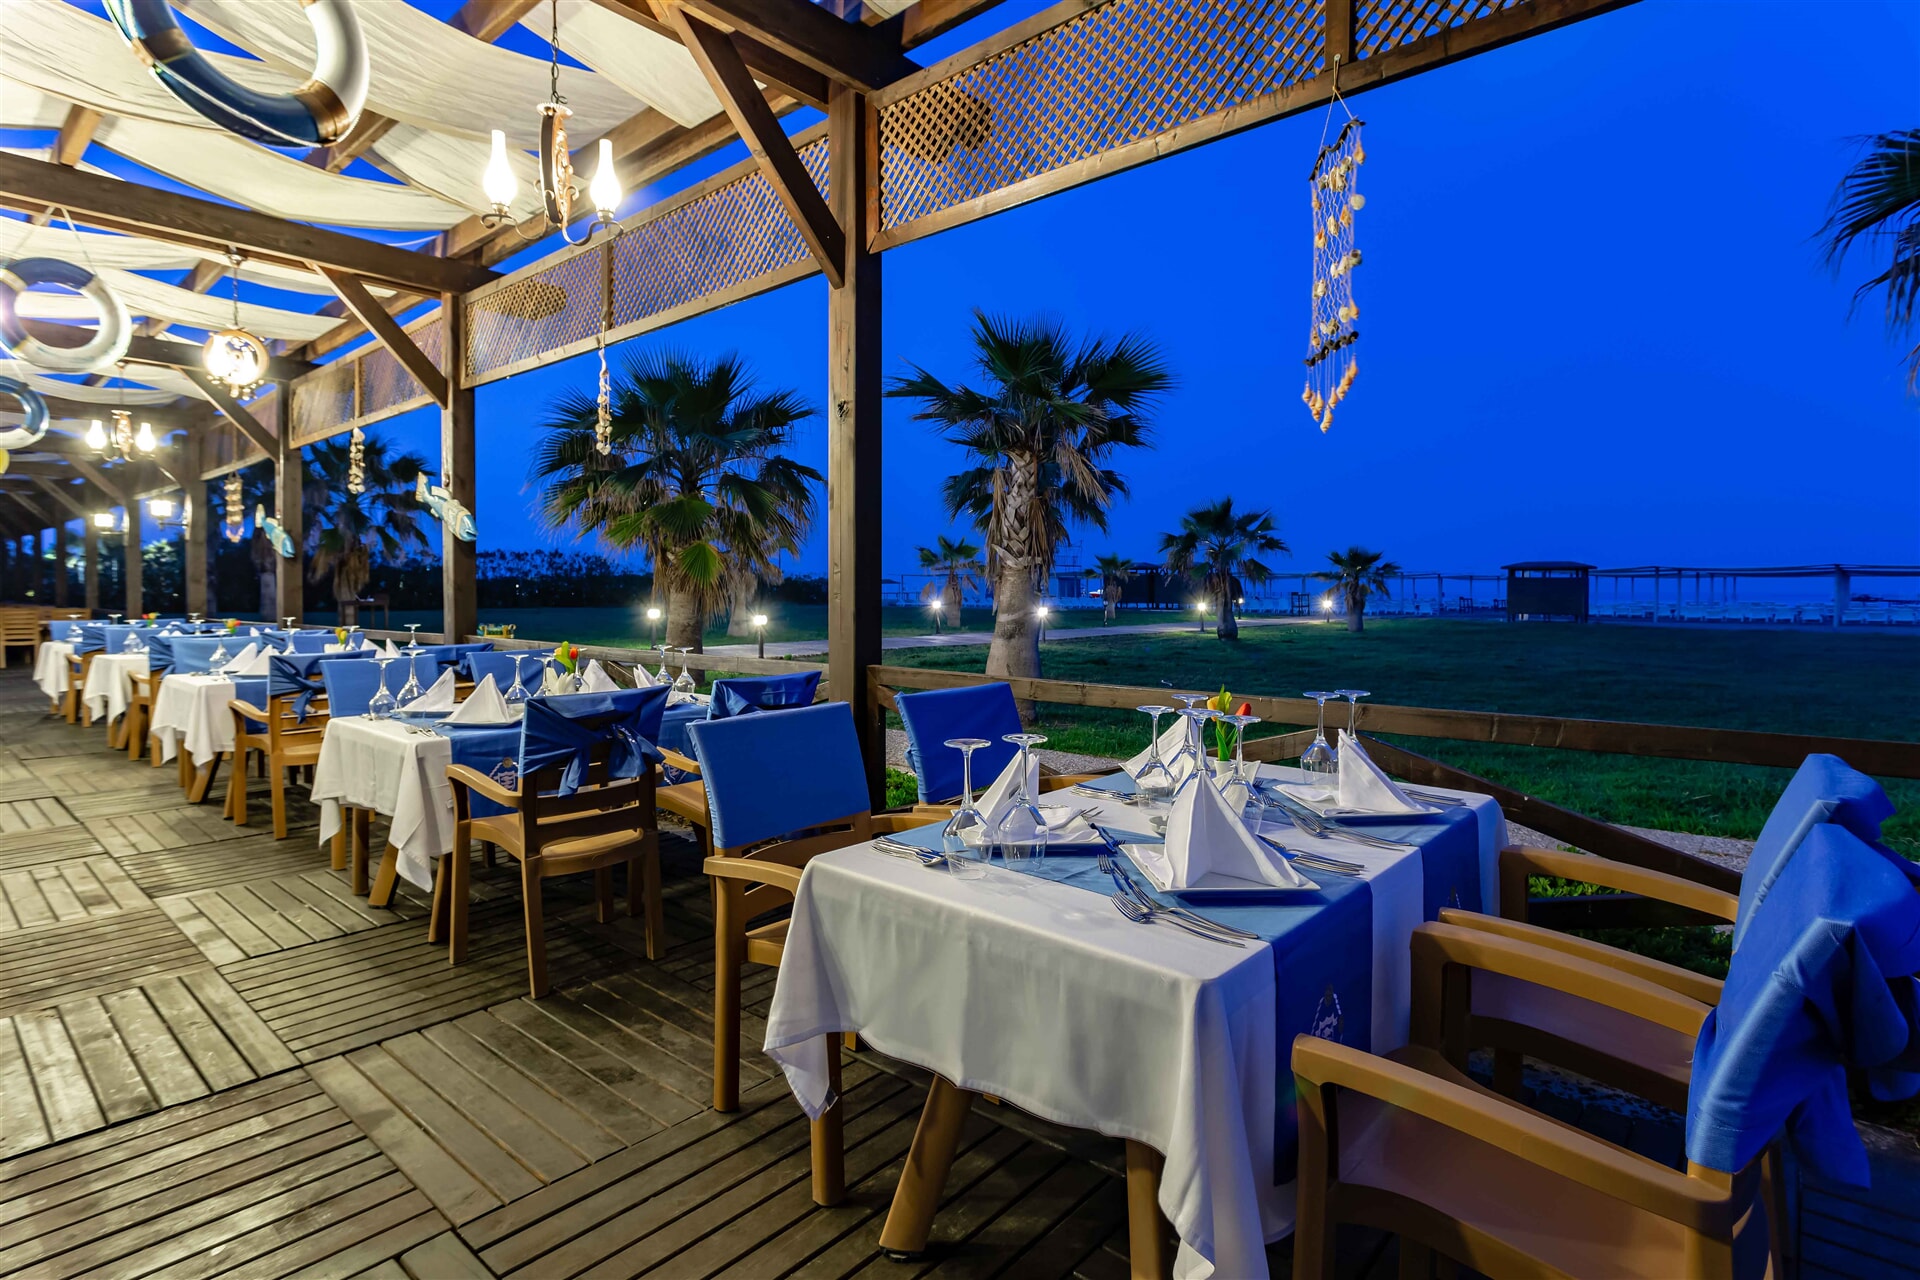 Seasonal fish and seafood menu accompanied by a romantic landspace will add color to your evenings.